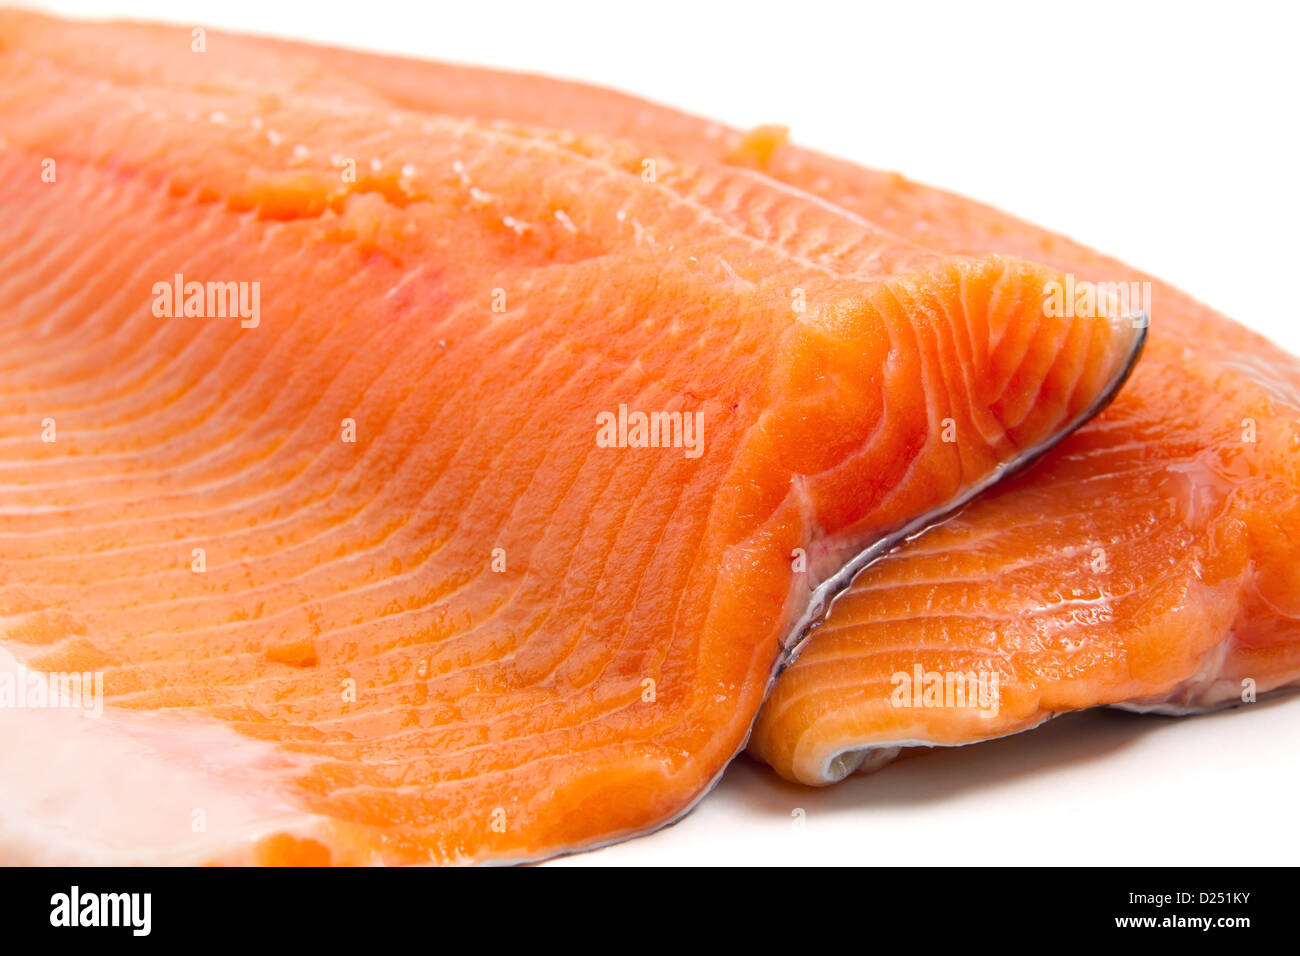 detail of salmon trout fillet over white background Stock Photo